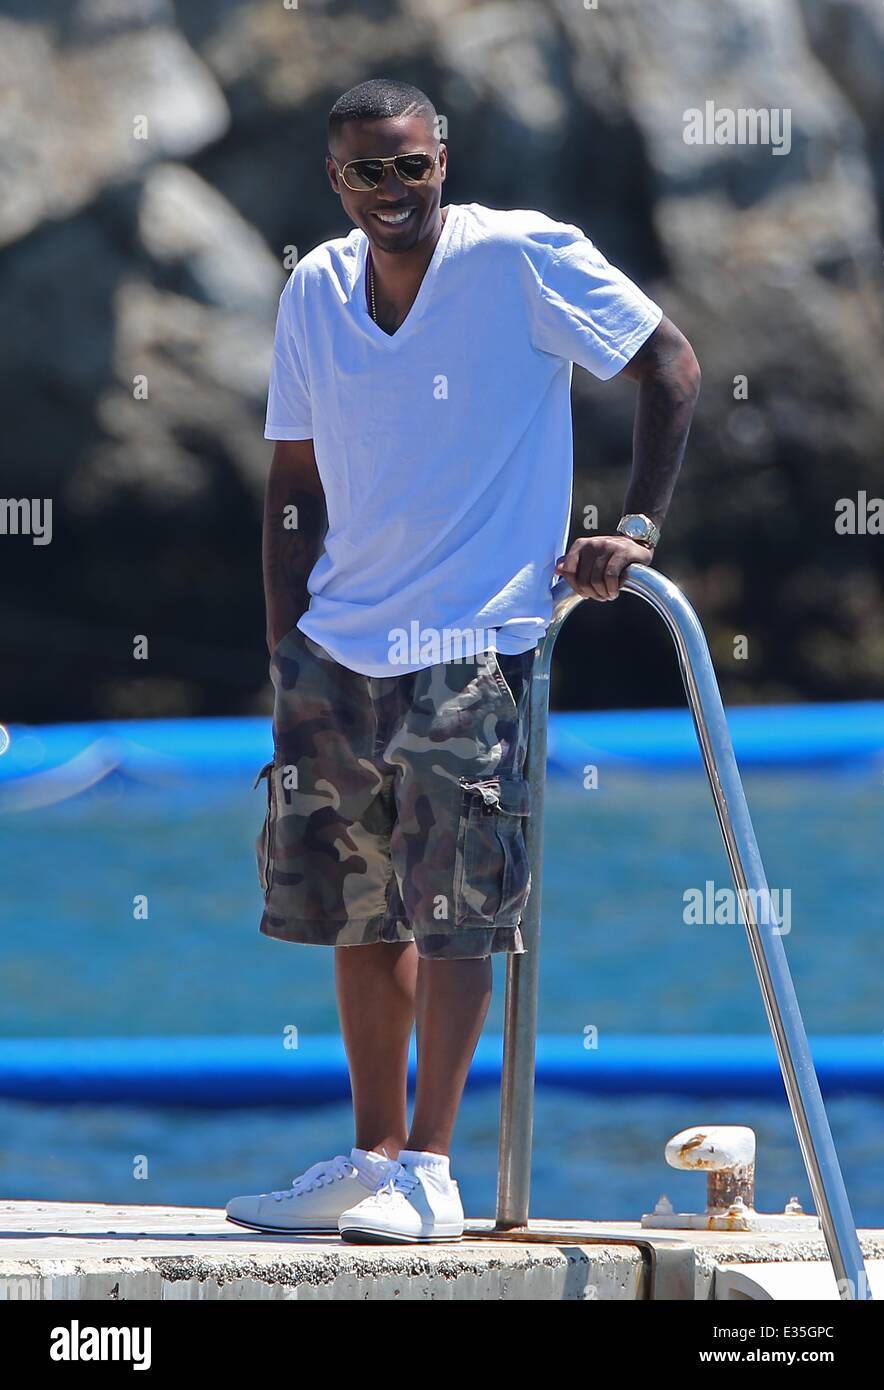 Rapper Nas enjoys a day with friends at the Hotel Du Cap-Eden Roc  restaurant in the south of France Featuring: Nas,Nasir bin Olu Dara Jones  Where: Cap D' Antibes, France When: 30